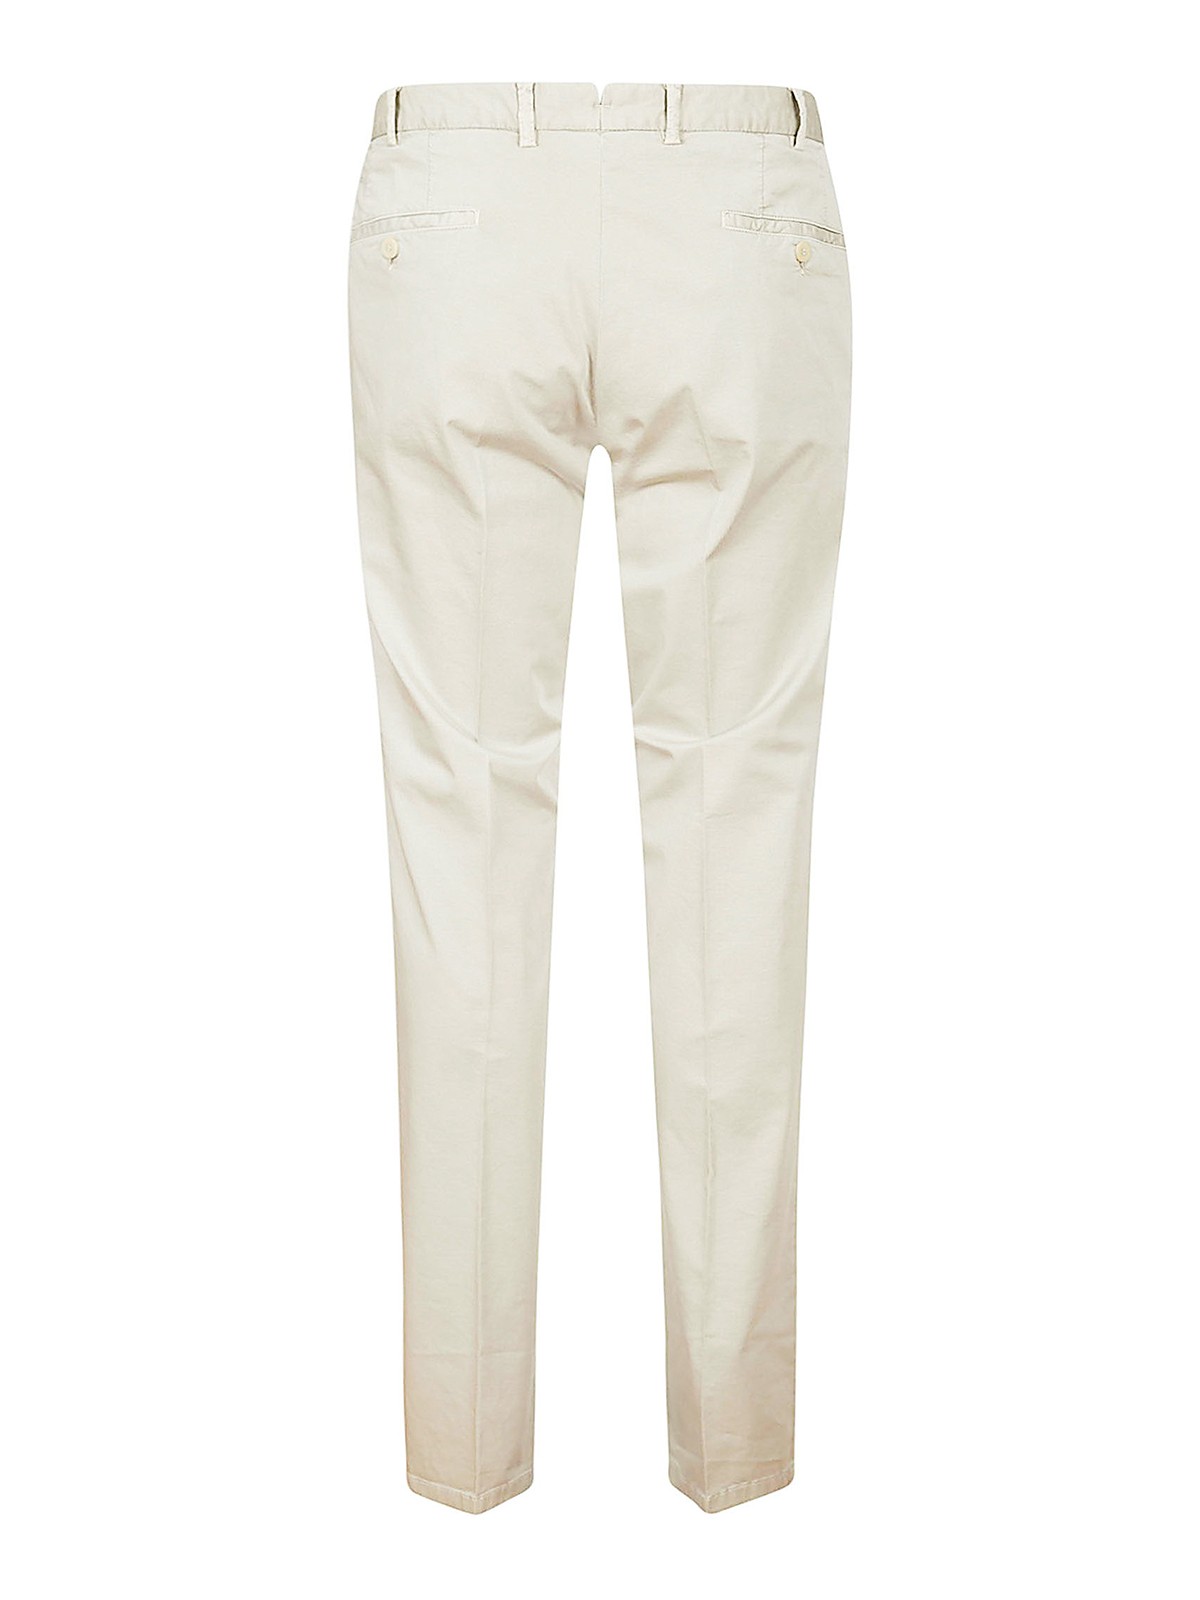 Casual trousers The garment - Trousers - 19306509 | Shop online at THEBS